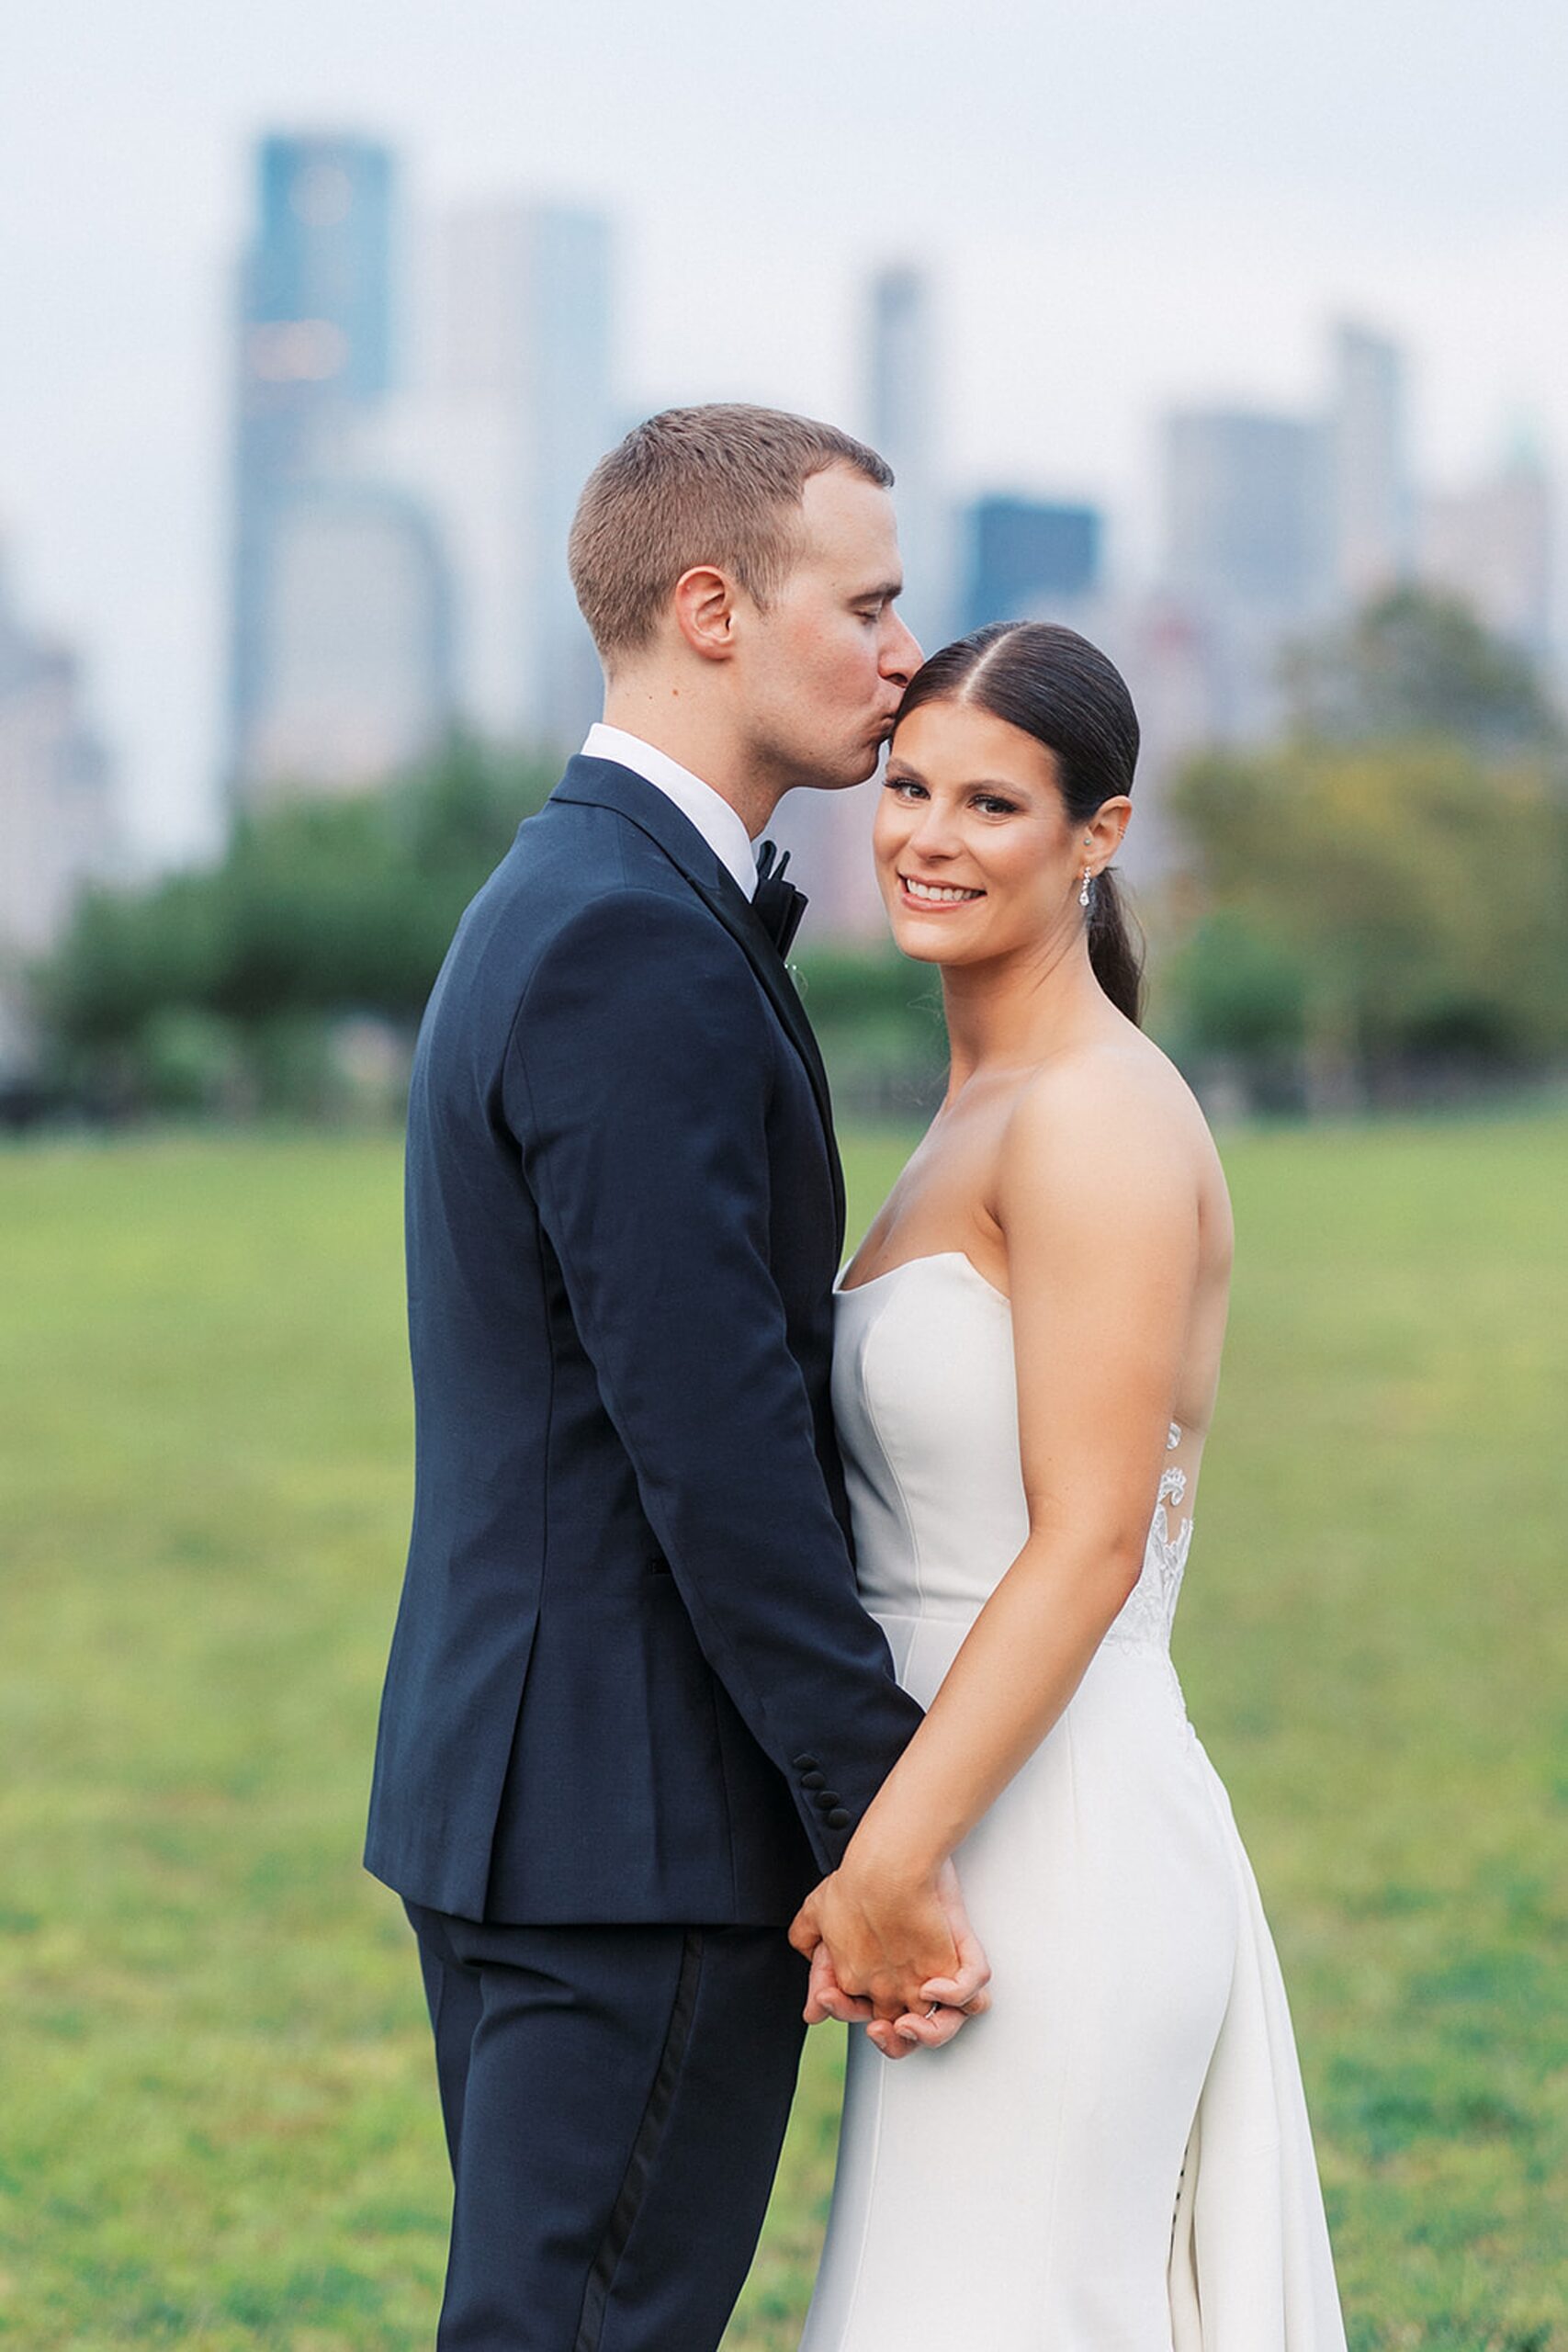 A groom kisses his bride on the temple while holding hands and standing in a grassy field